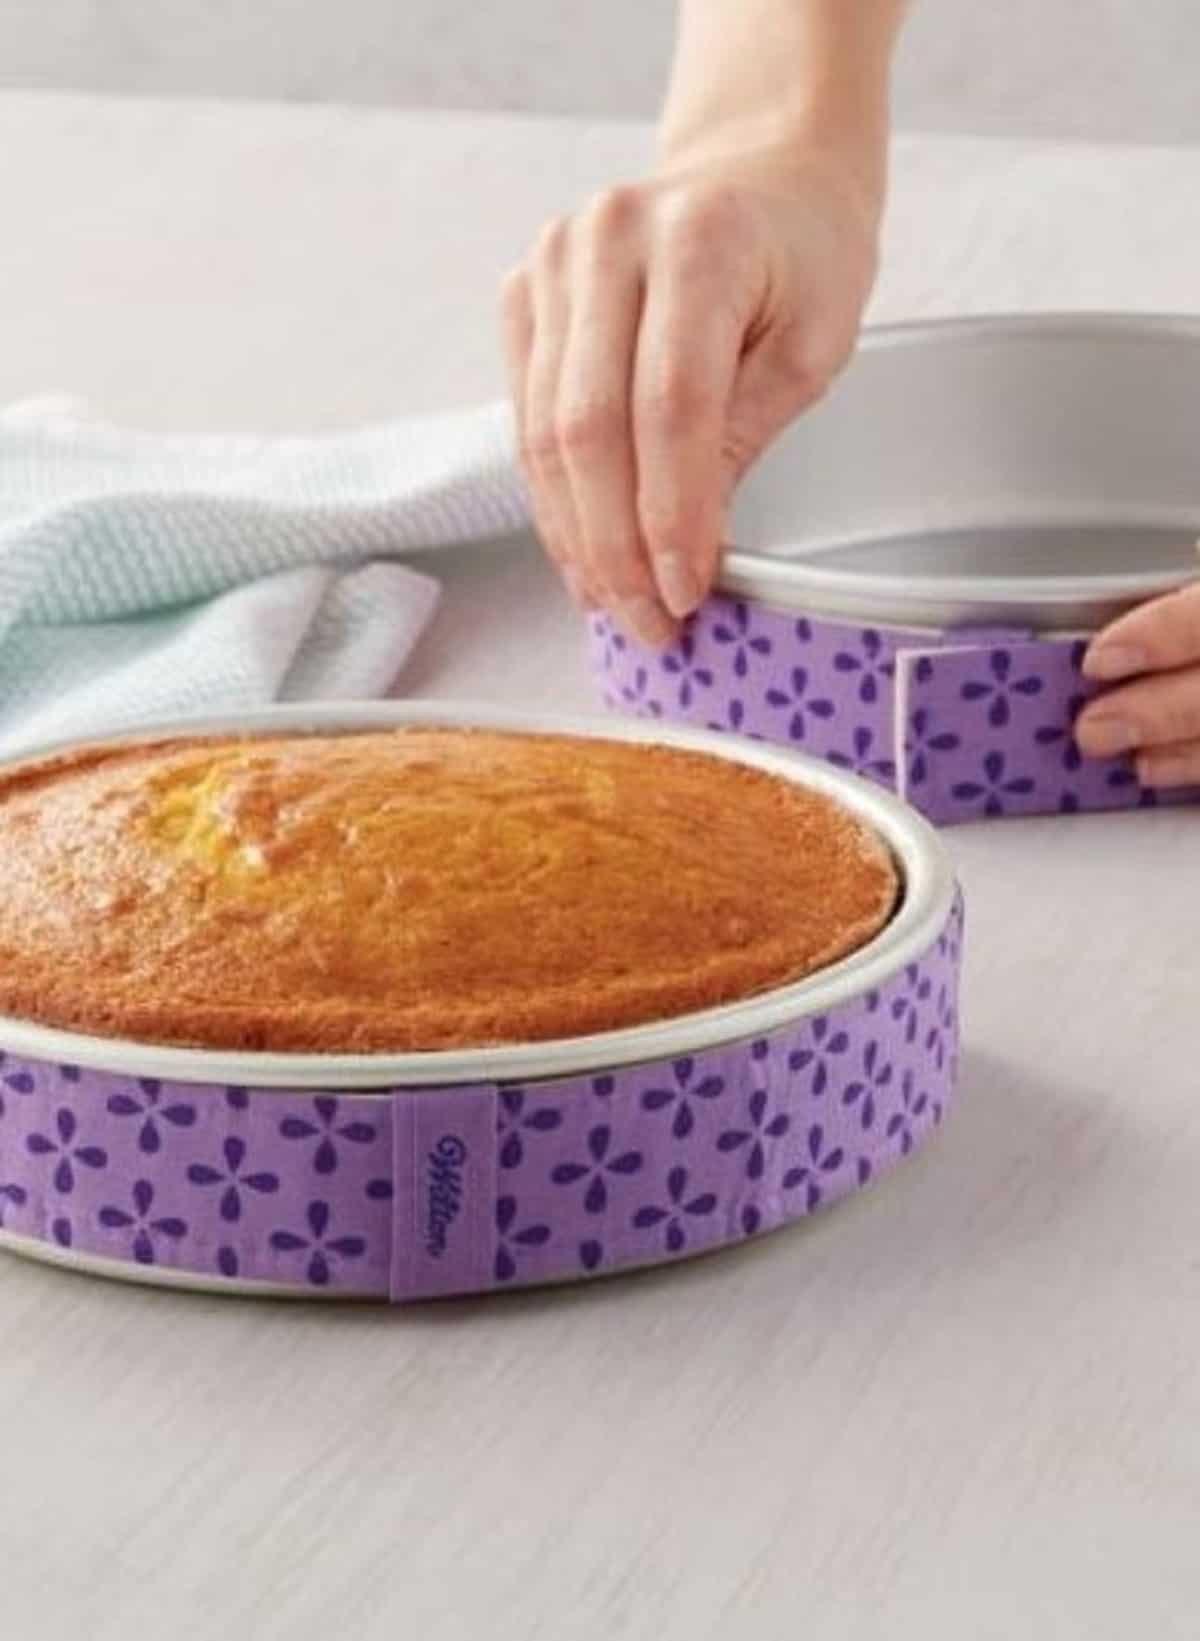 bake-your-cake-evenly-post-image